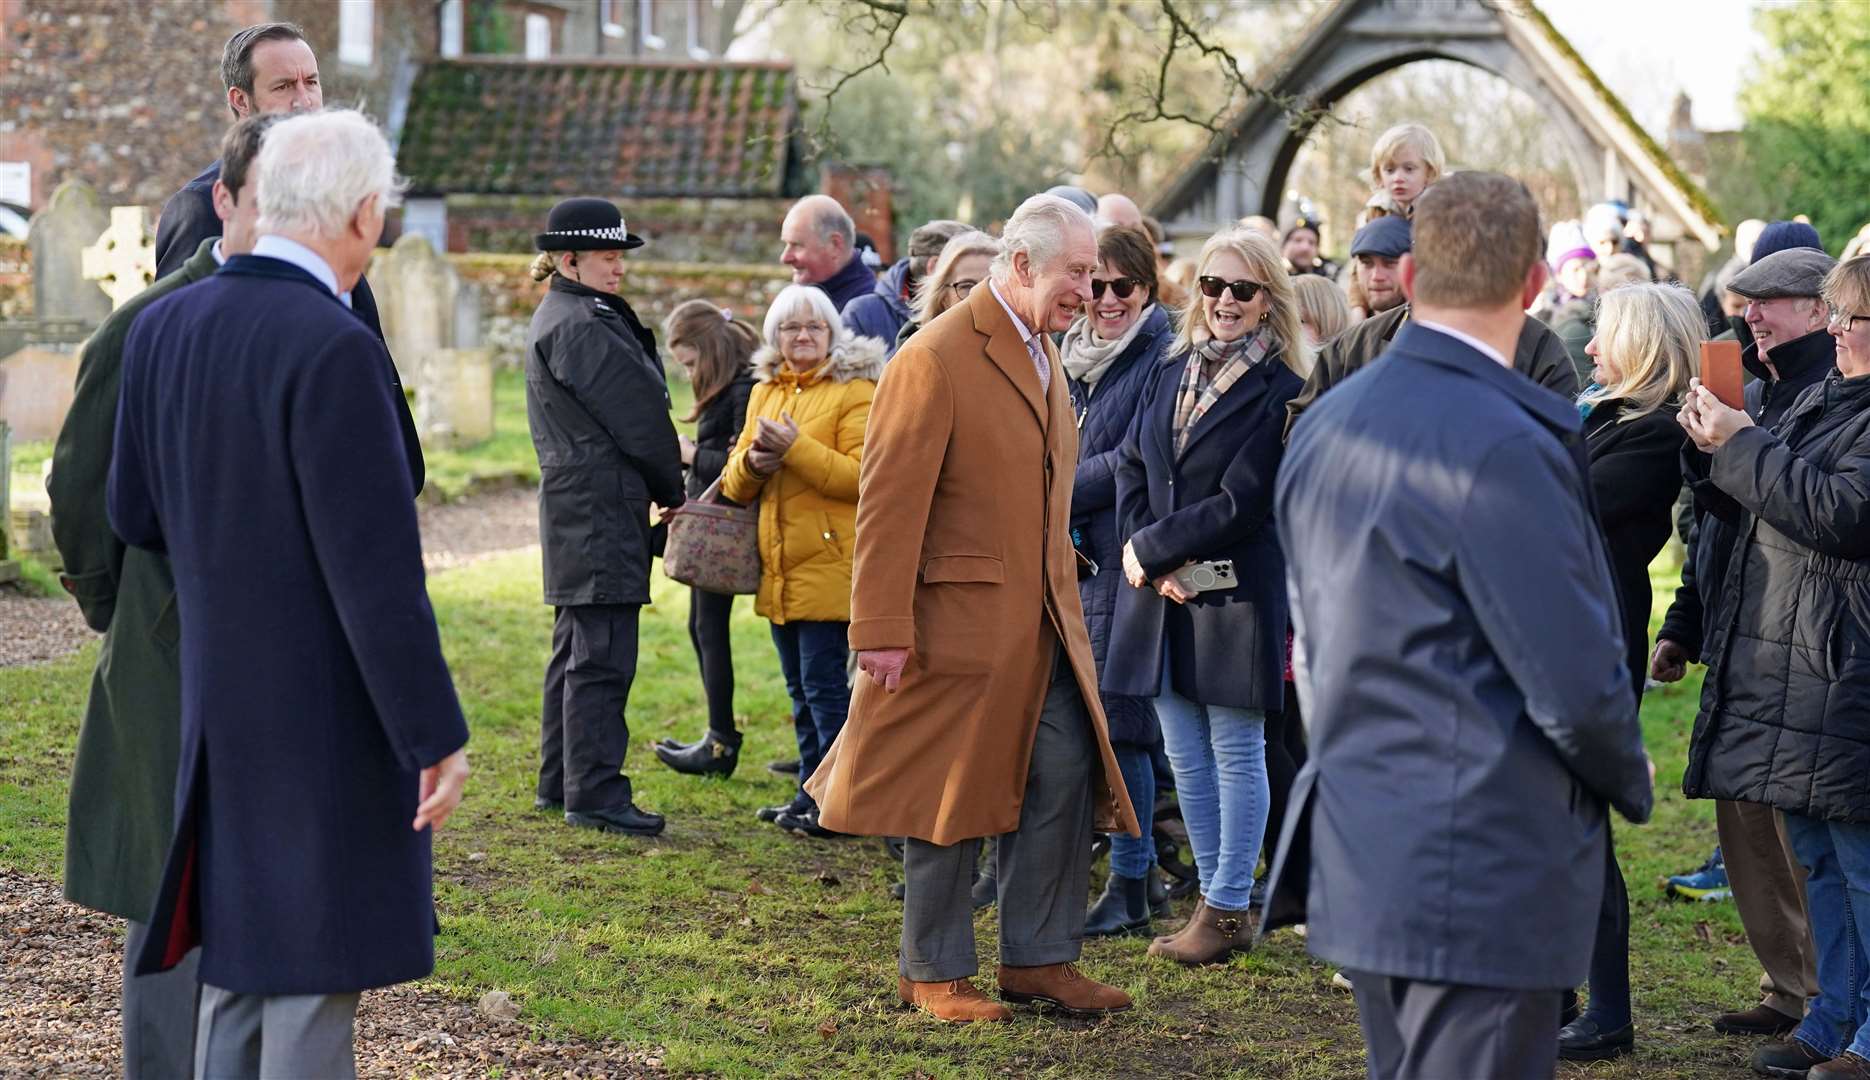 A group of well-wishers gathered to greet the King at Castle Rising Church in Norfolk (Joe Giddens/PA)